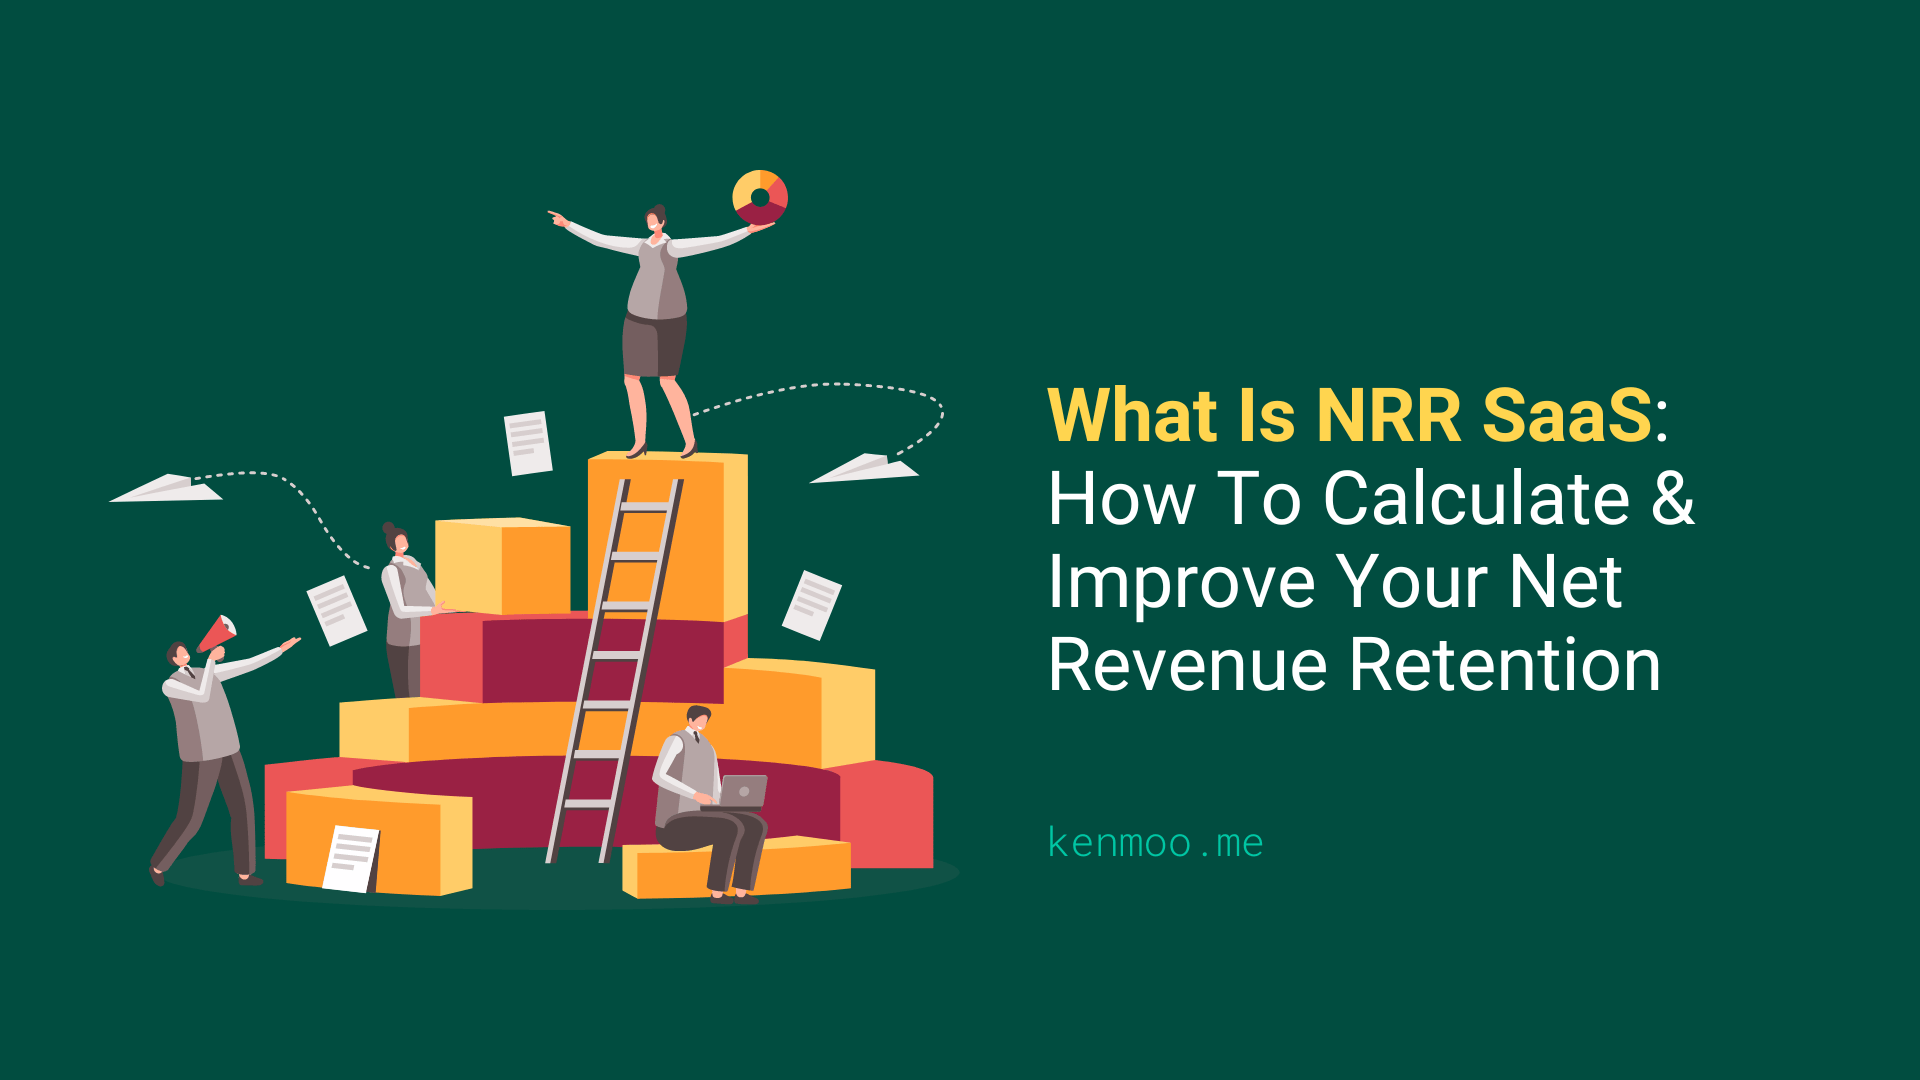 What Is NRR SaaS: How To Calculate & Improve Your Net Revenue Retention